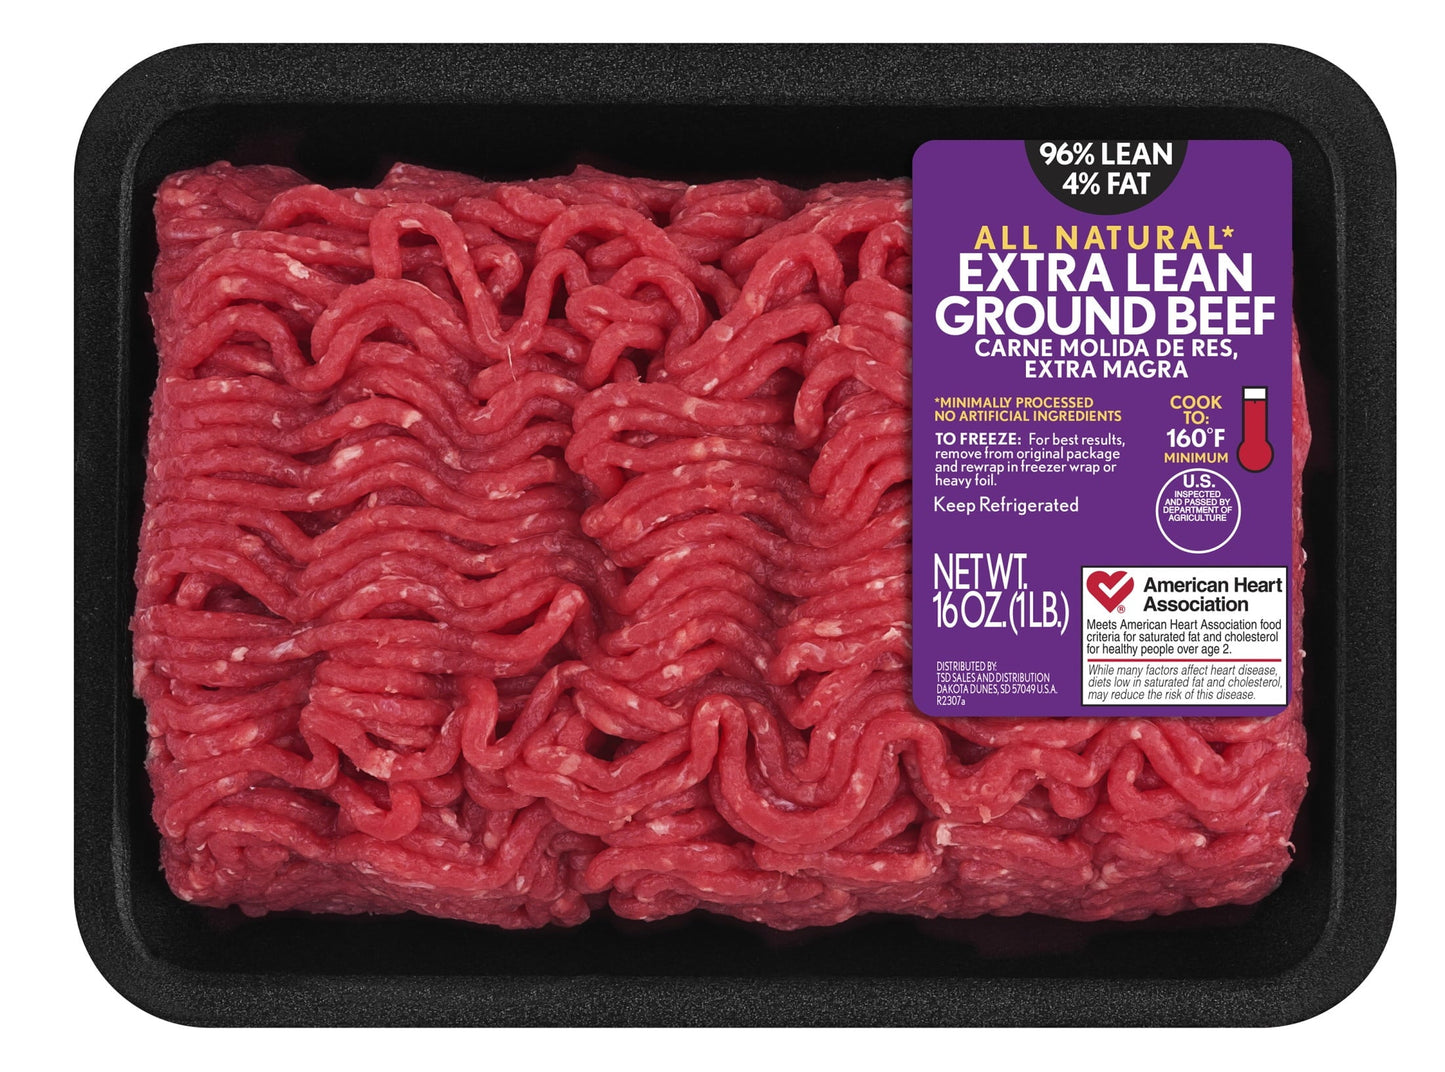 All Natural* 96% Lean/4% Fat Extra Lean Ground Beef, 1 lb Tray